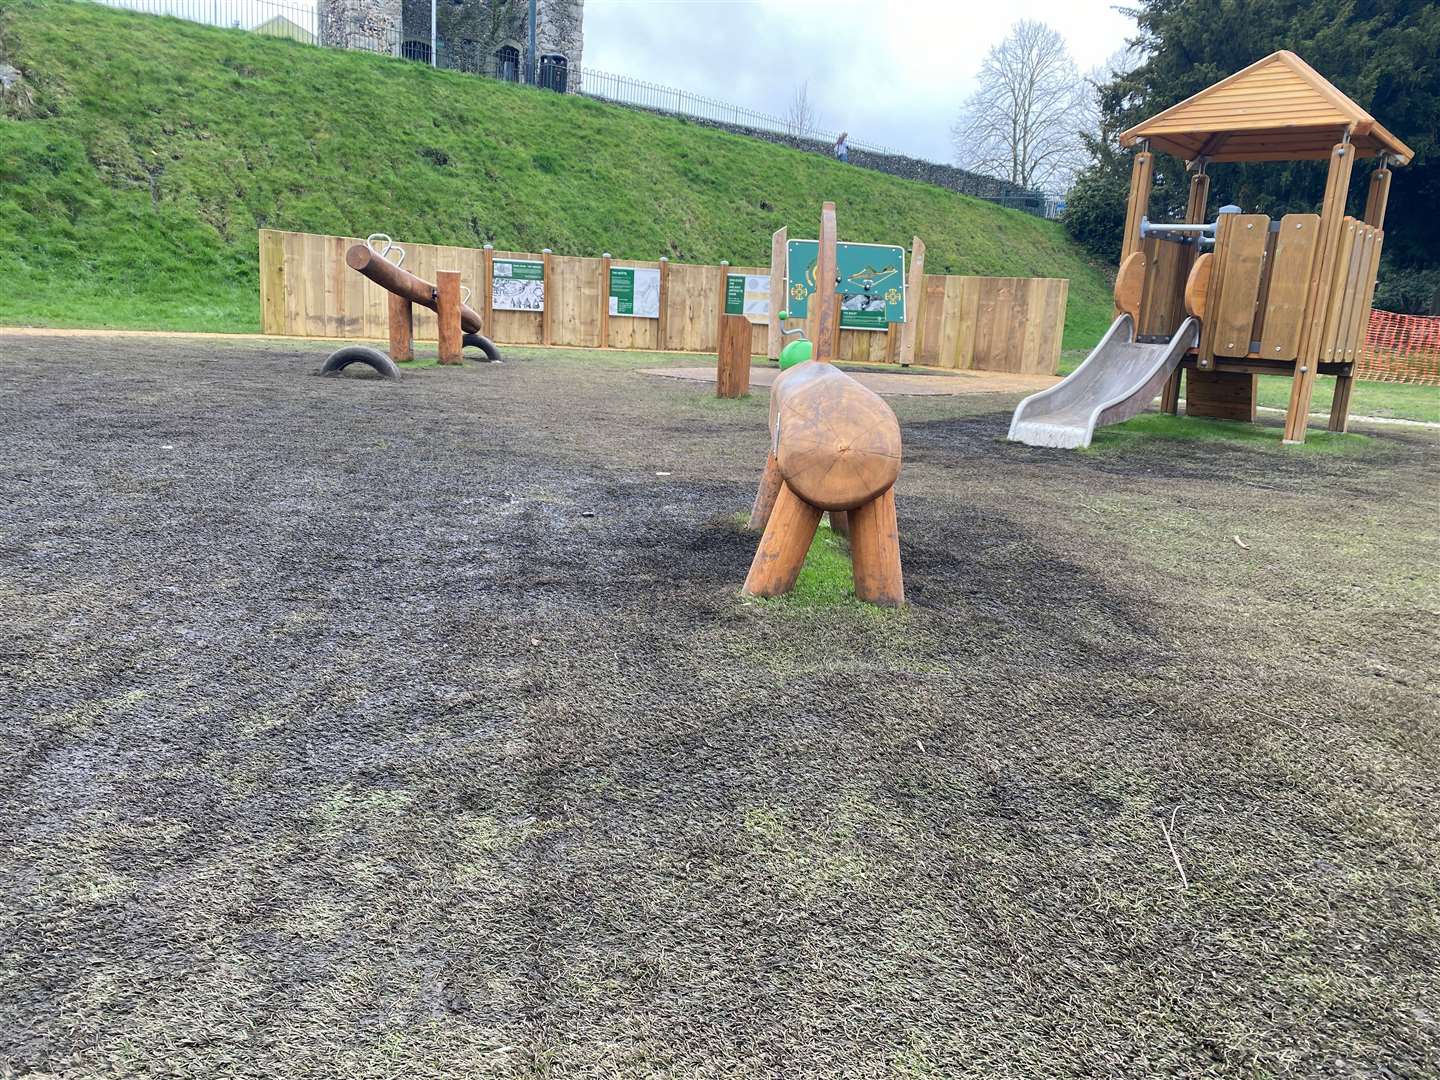 The council says hybrid artificial grass had specifically been chosen for a more natural look